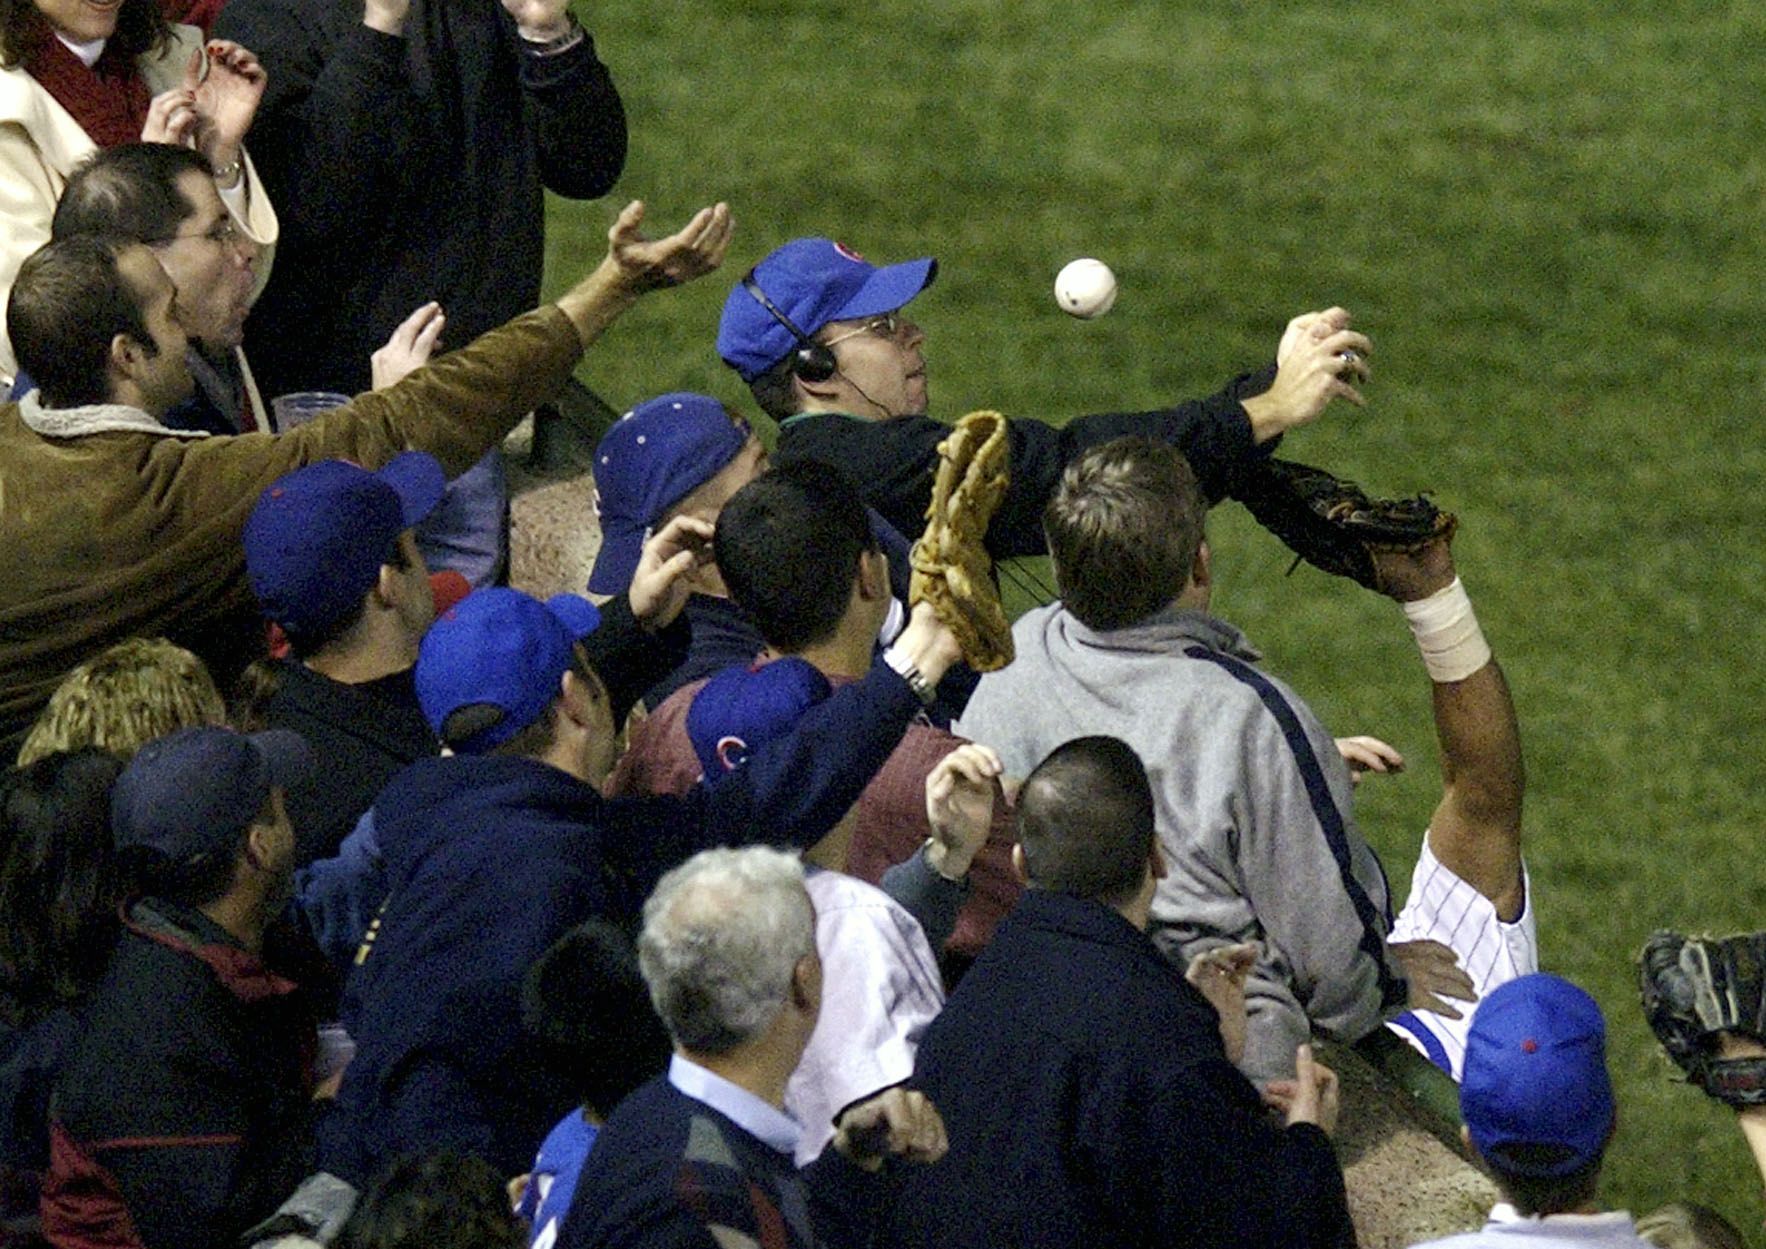 Steve Bartman to receive 2016 Cubs World Series ring